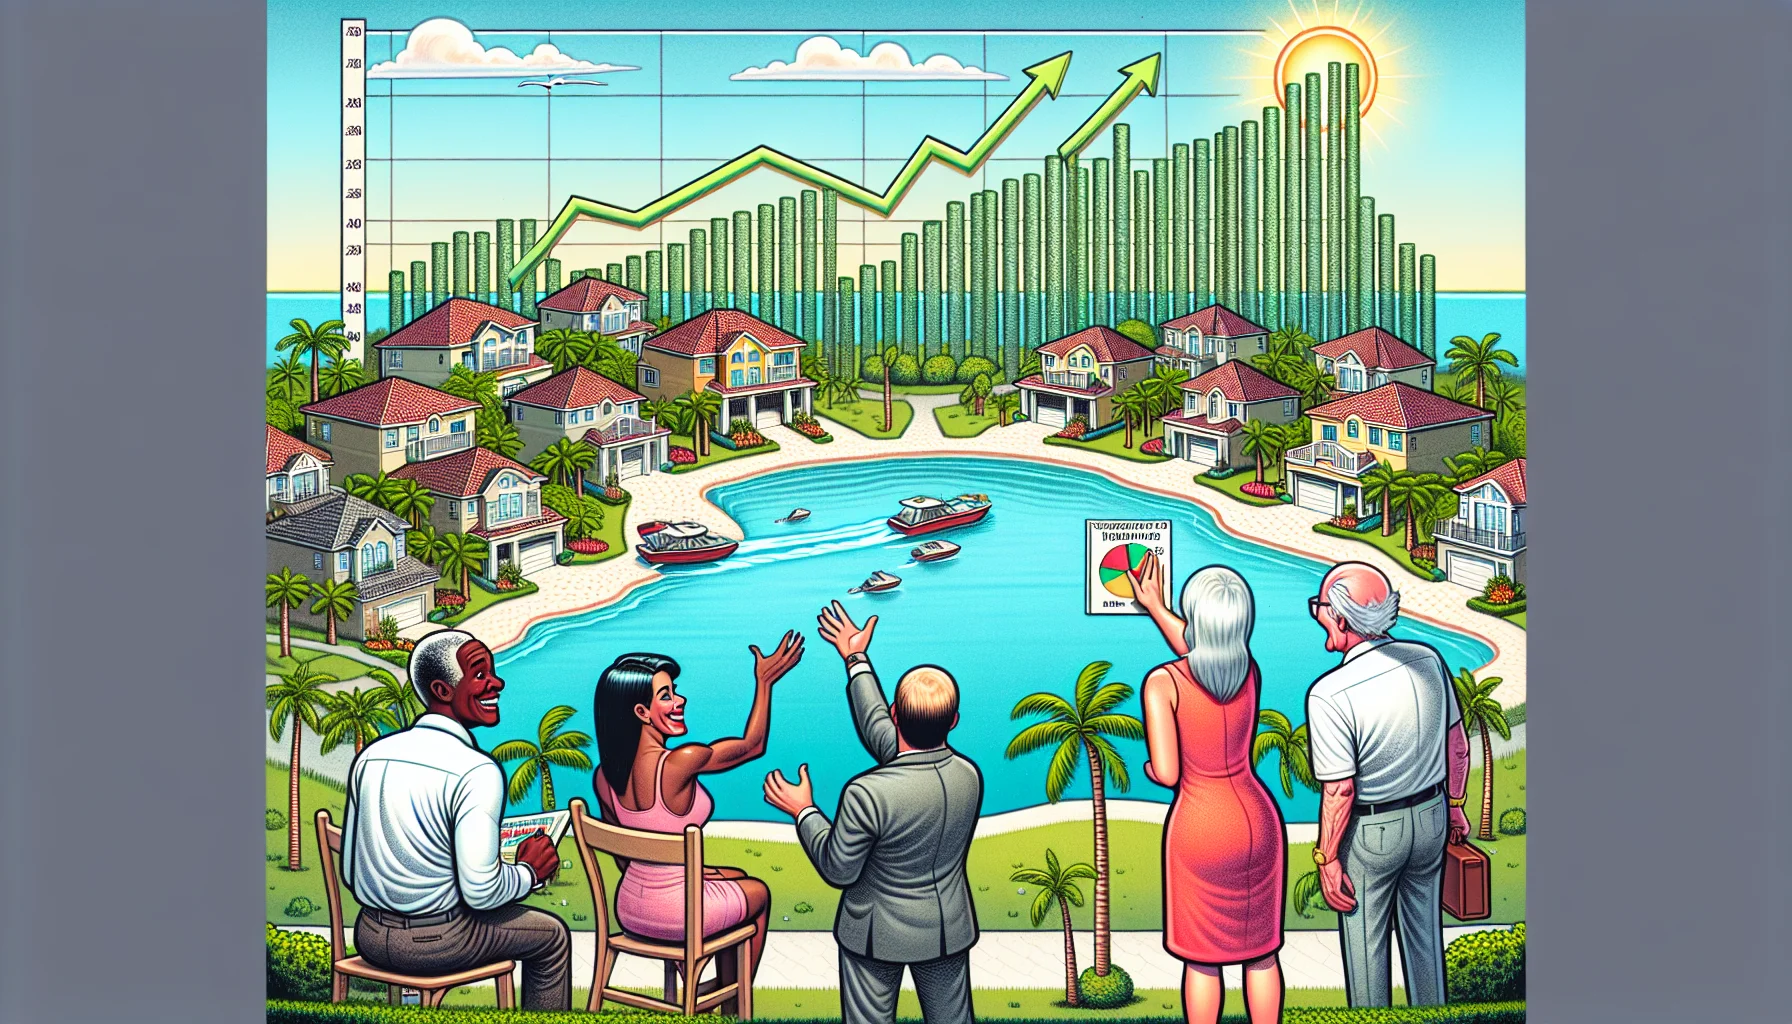 A humorous and strangely optimistic visualization of the Florida real estate market in the next five years. The scenario is perfect regarding real estate: Homes are appreciating at an unprecedented pace, and investors are delightfully surprised. The residential neighborhoods are pristine waterfront properties with well-manicured lawns and palm trees lined perfectly. A chart on the corner of the image shows statistics skyrocketing, and the weather is sunny and perfect as always. A few people of diverse descents - a Black woman, Hispanic man, Caucasian elderly couple - are seen cheerfully discussing their investments in this prosperous landscape.